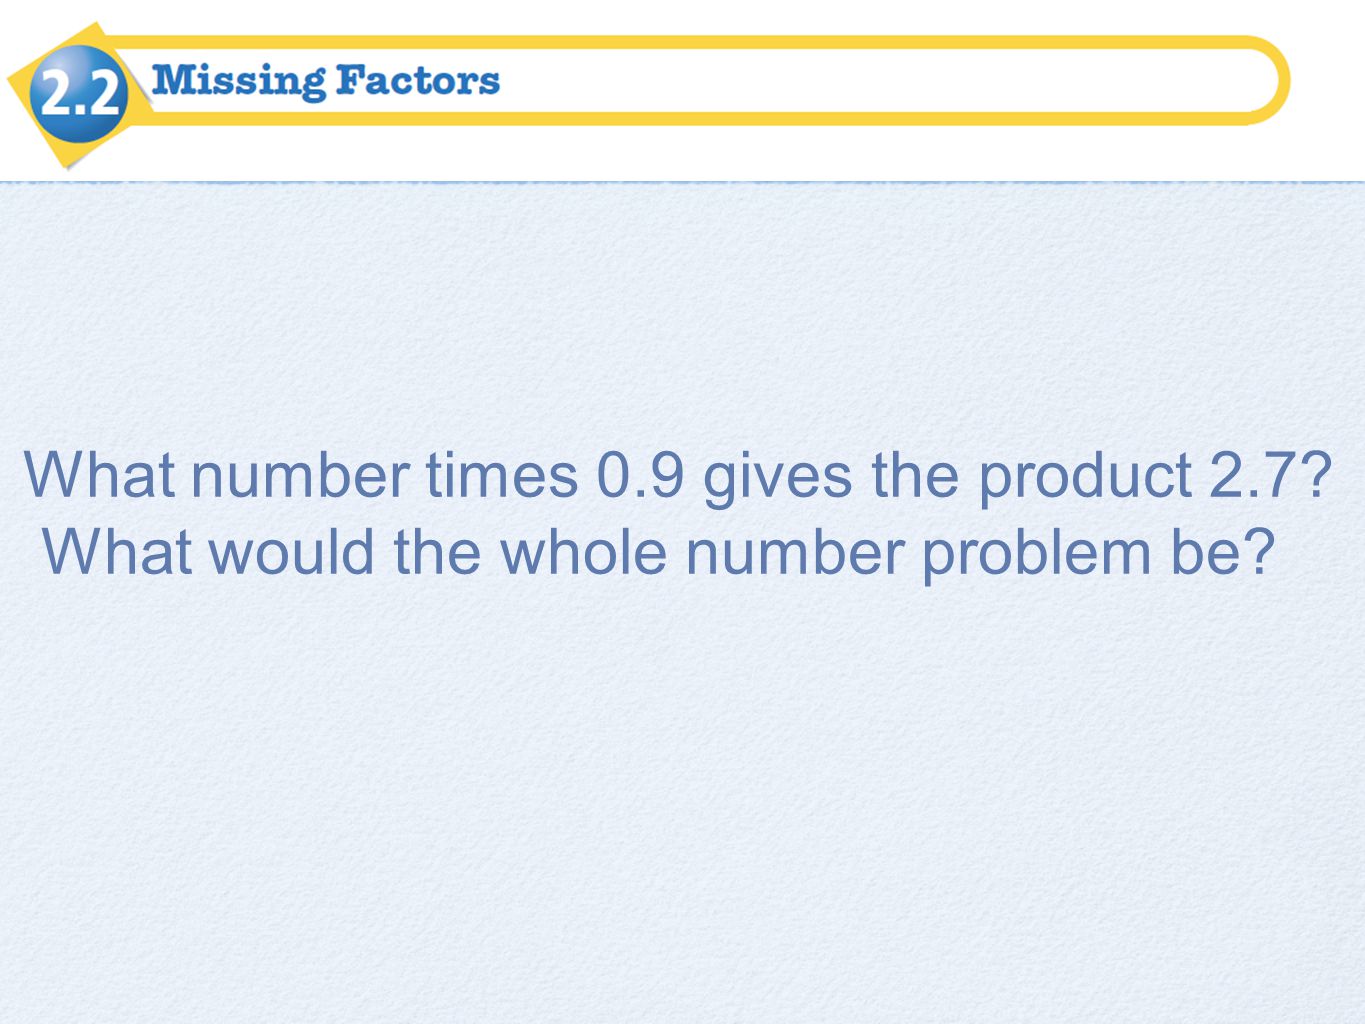 What number times 0.9 gives the product 2.7